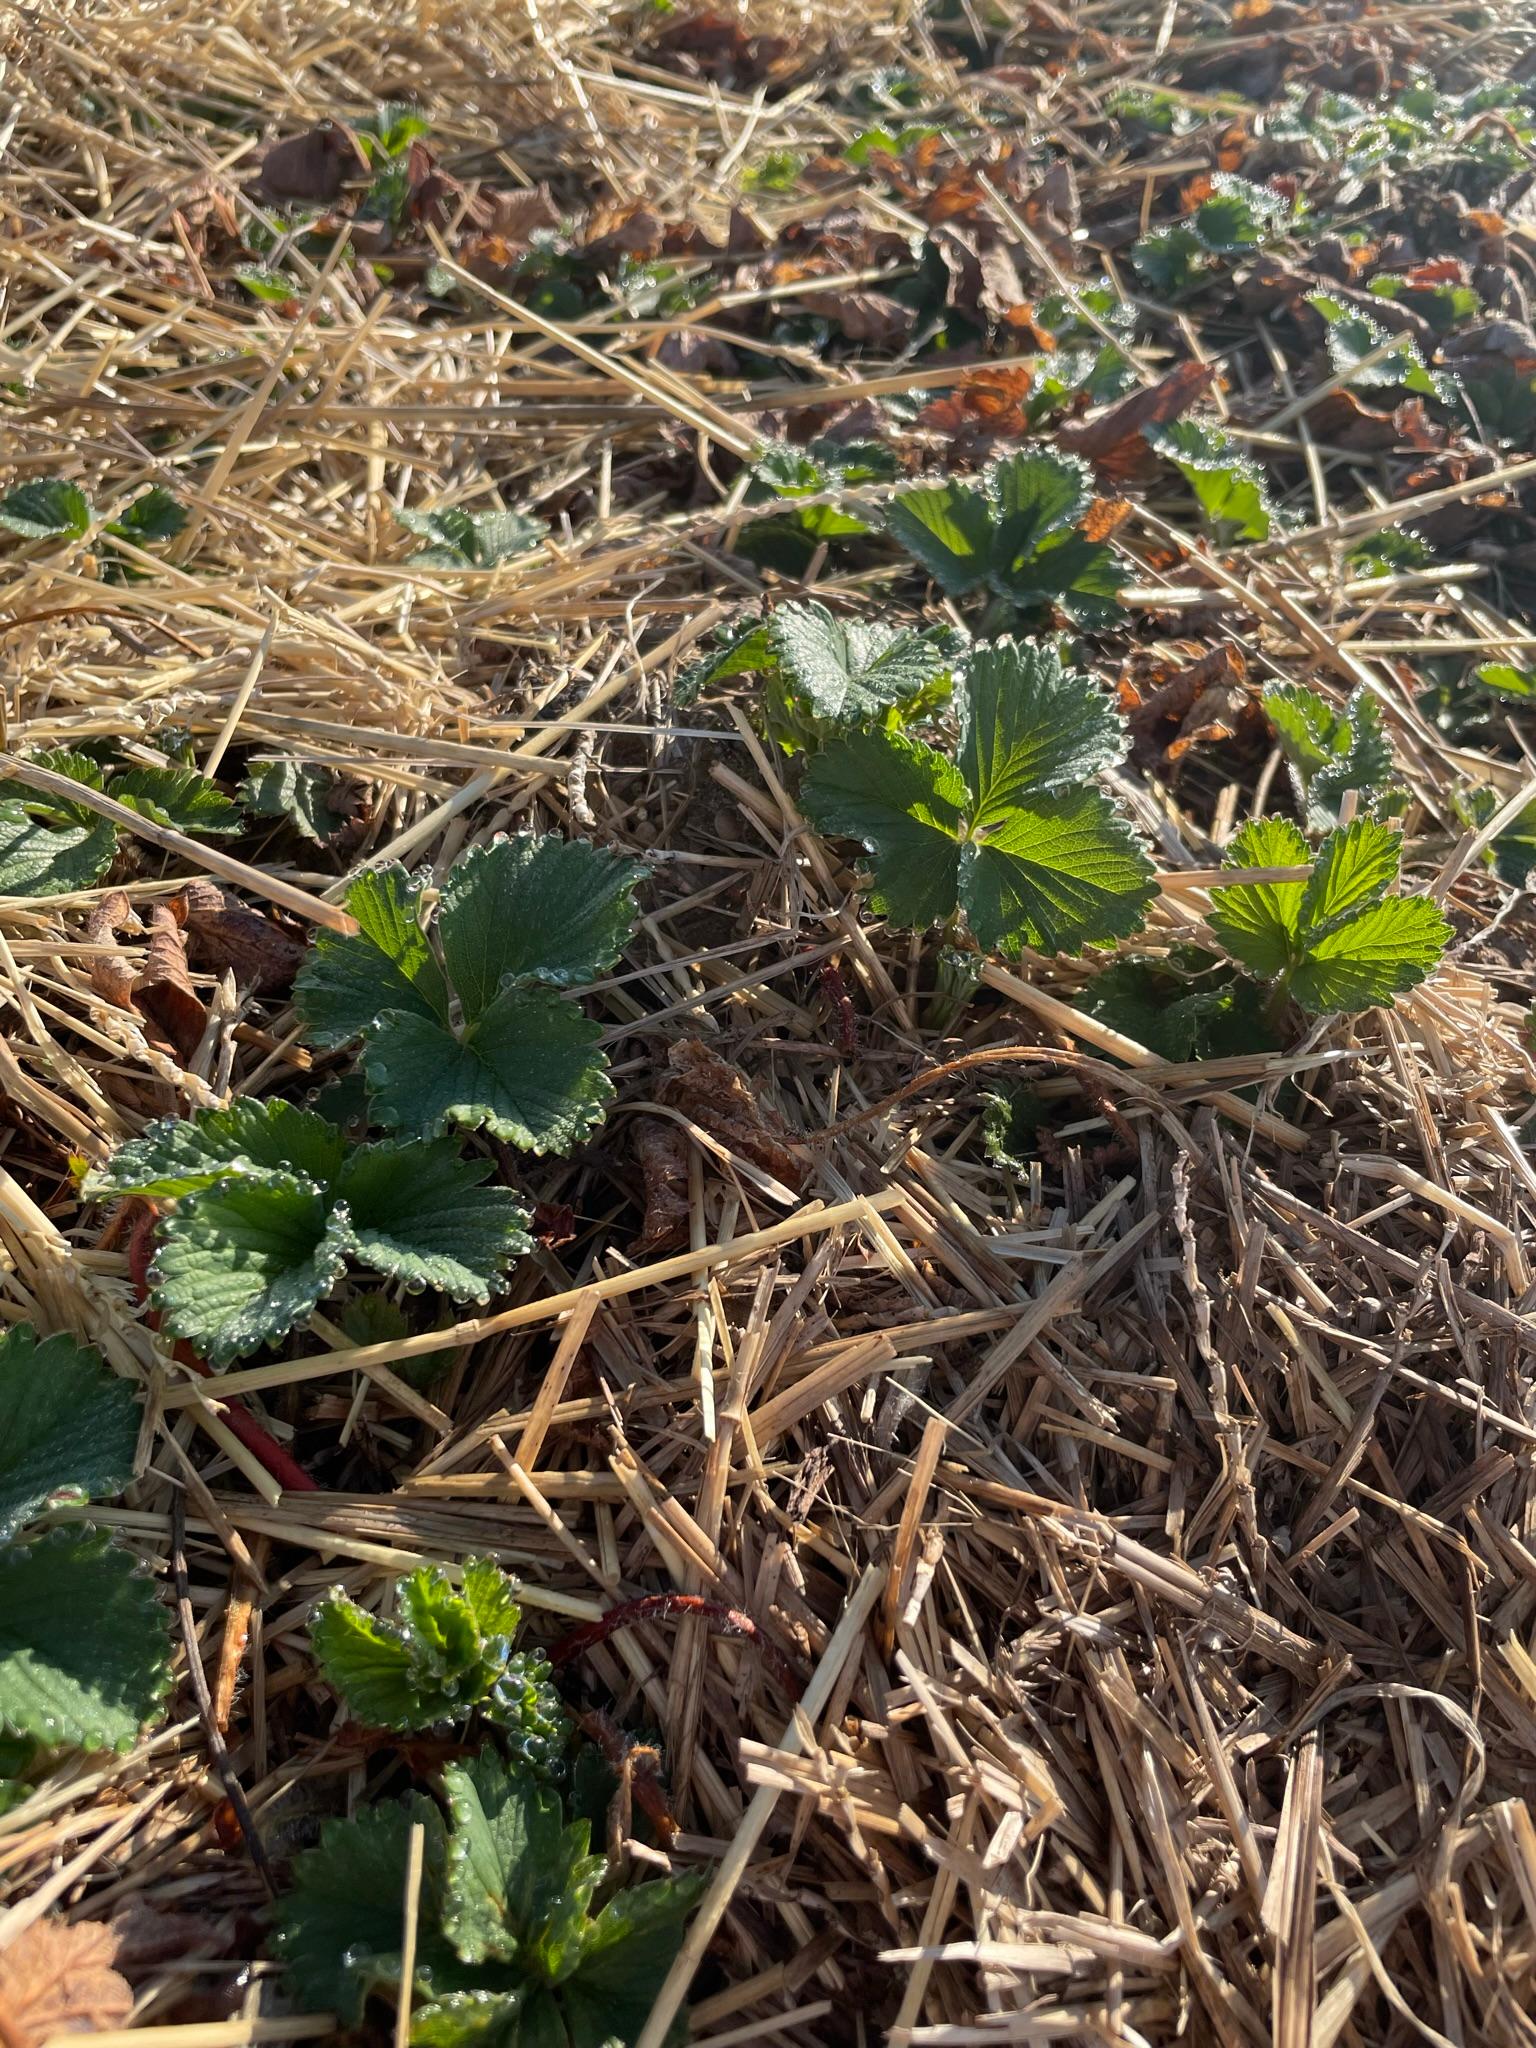 Strawberry leaves growing in a field.